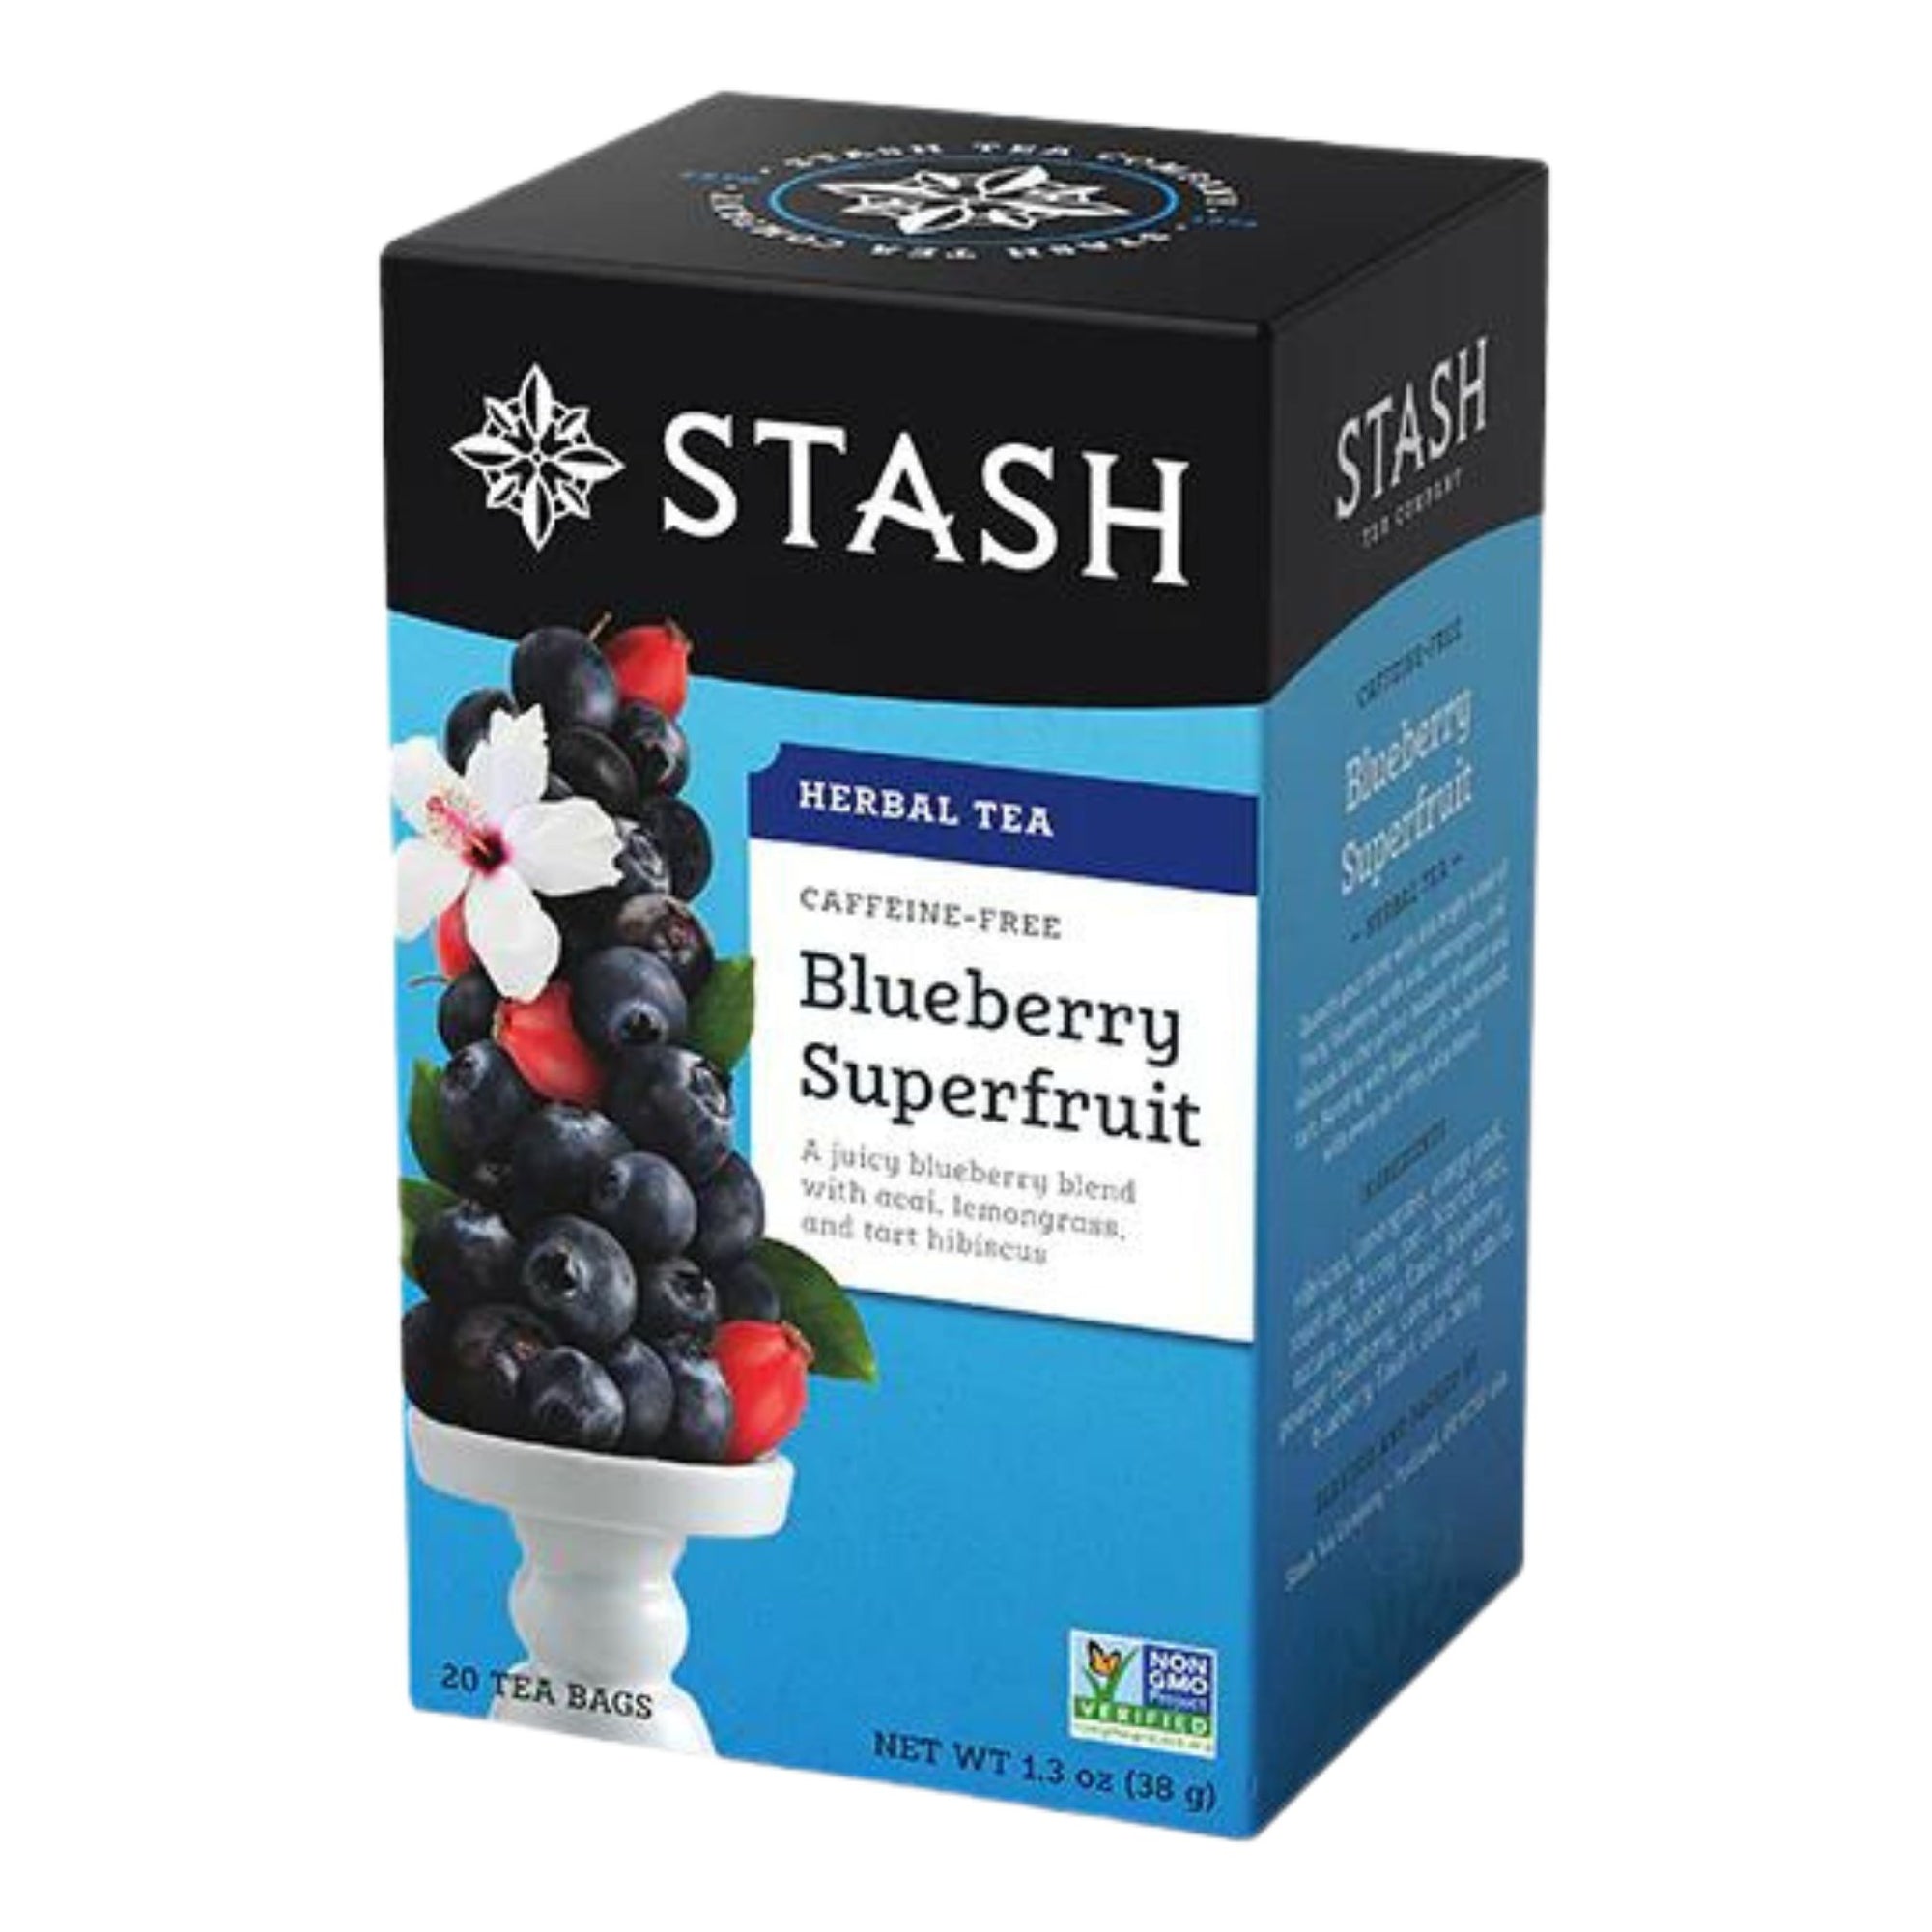 Stash Blueberry Superfruit Herbal Tea - 20 tea bags in a box - A juicy blueberry blend with acai, lemongrass and tart hibiscus.